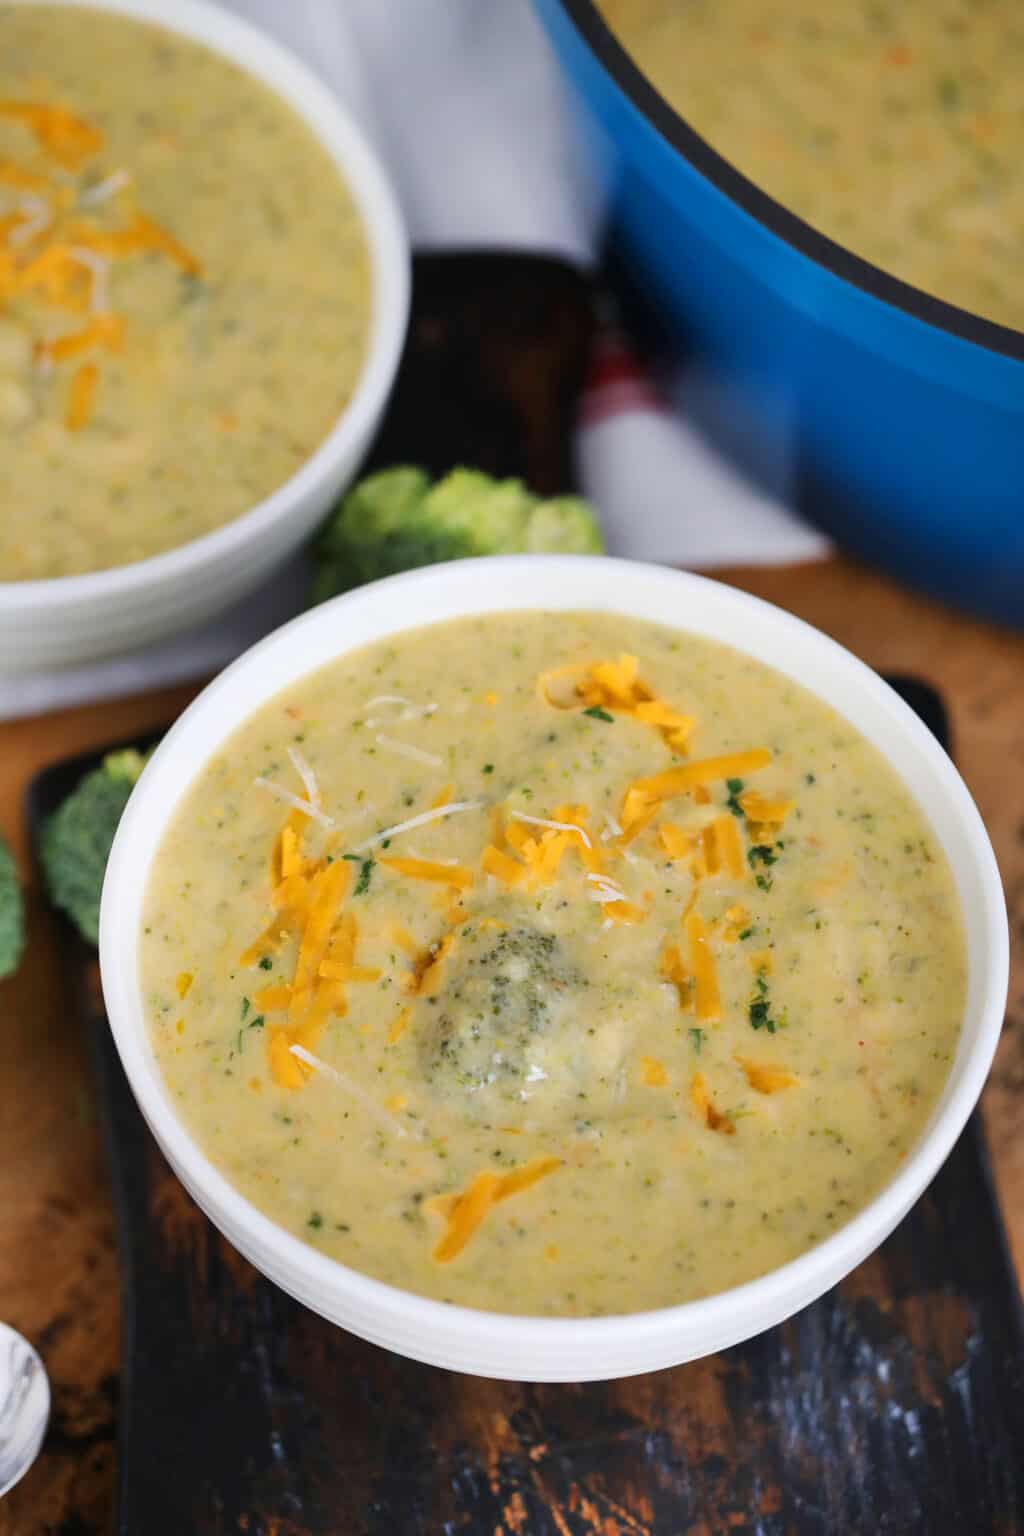 Broccoli Soup with Cheddar and Asiago {Delicious!} - The Shortcut Kitchen